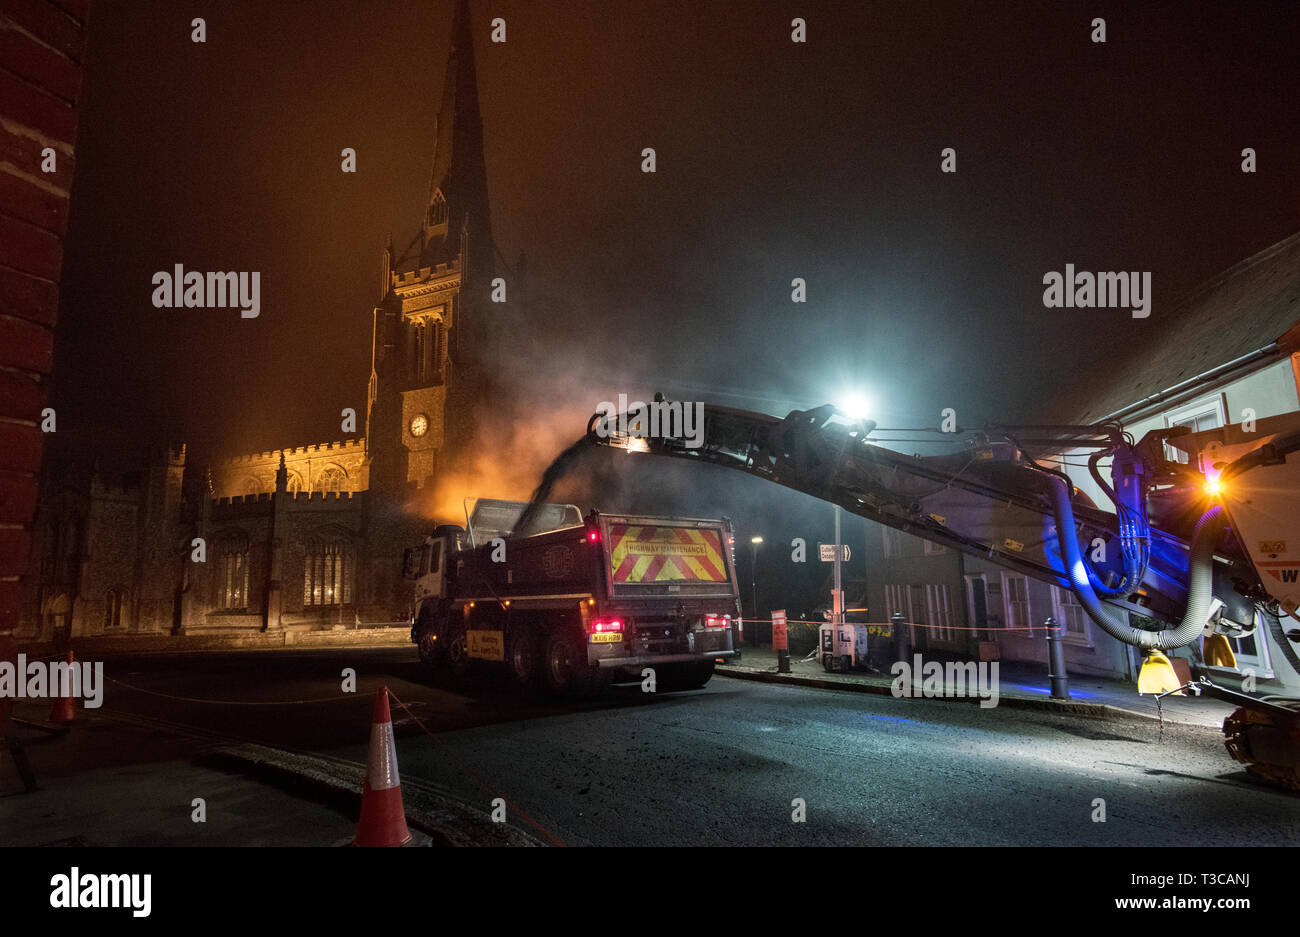 Thaxted Essex England UK. Major resurfacing work for 7 nights 5 April to 12 April 2019 Night Work: Photograph shows the busy night scene as workers fr Stock Photo